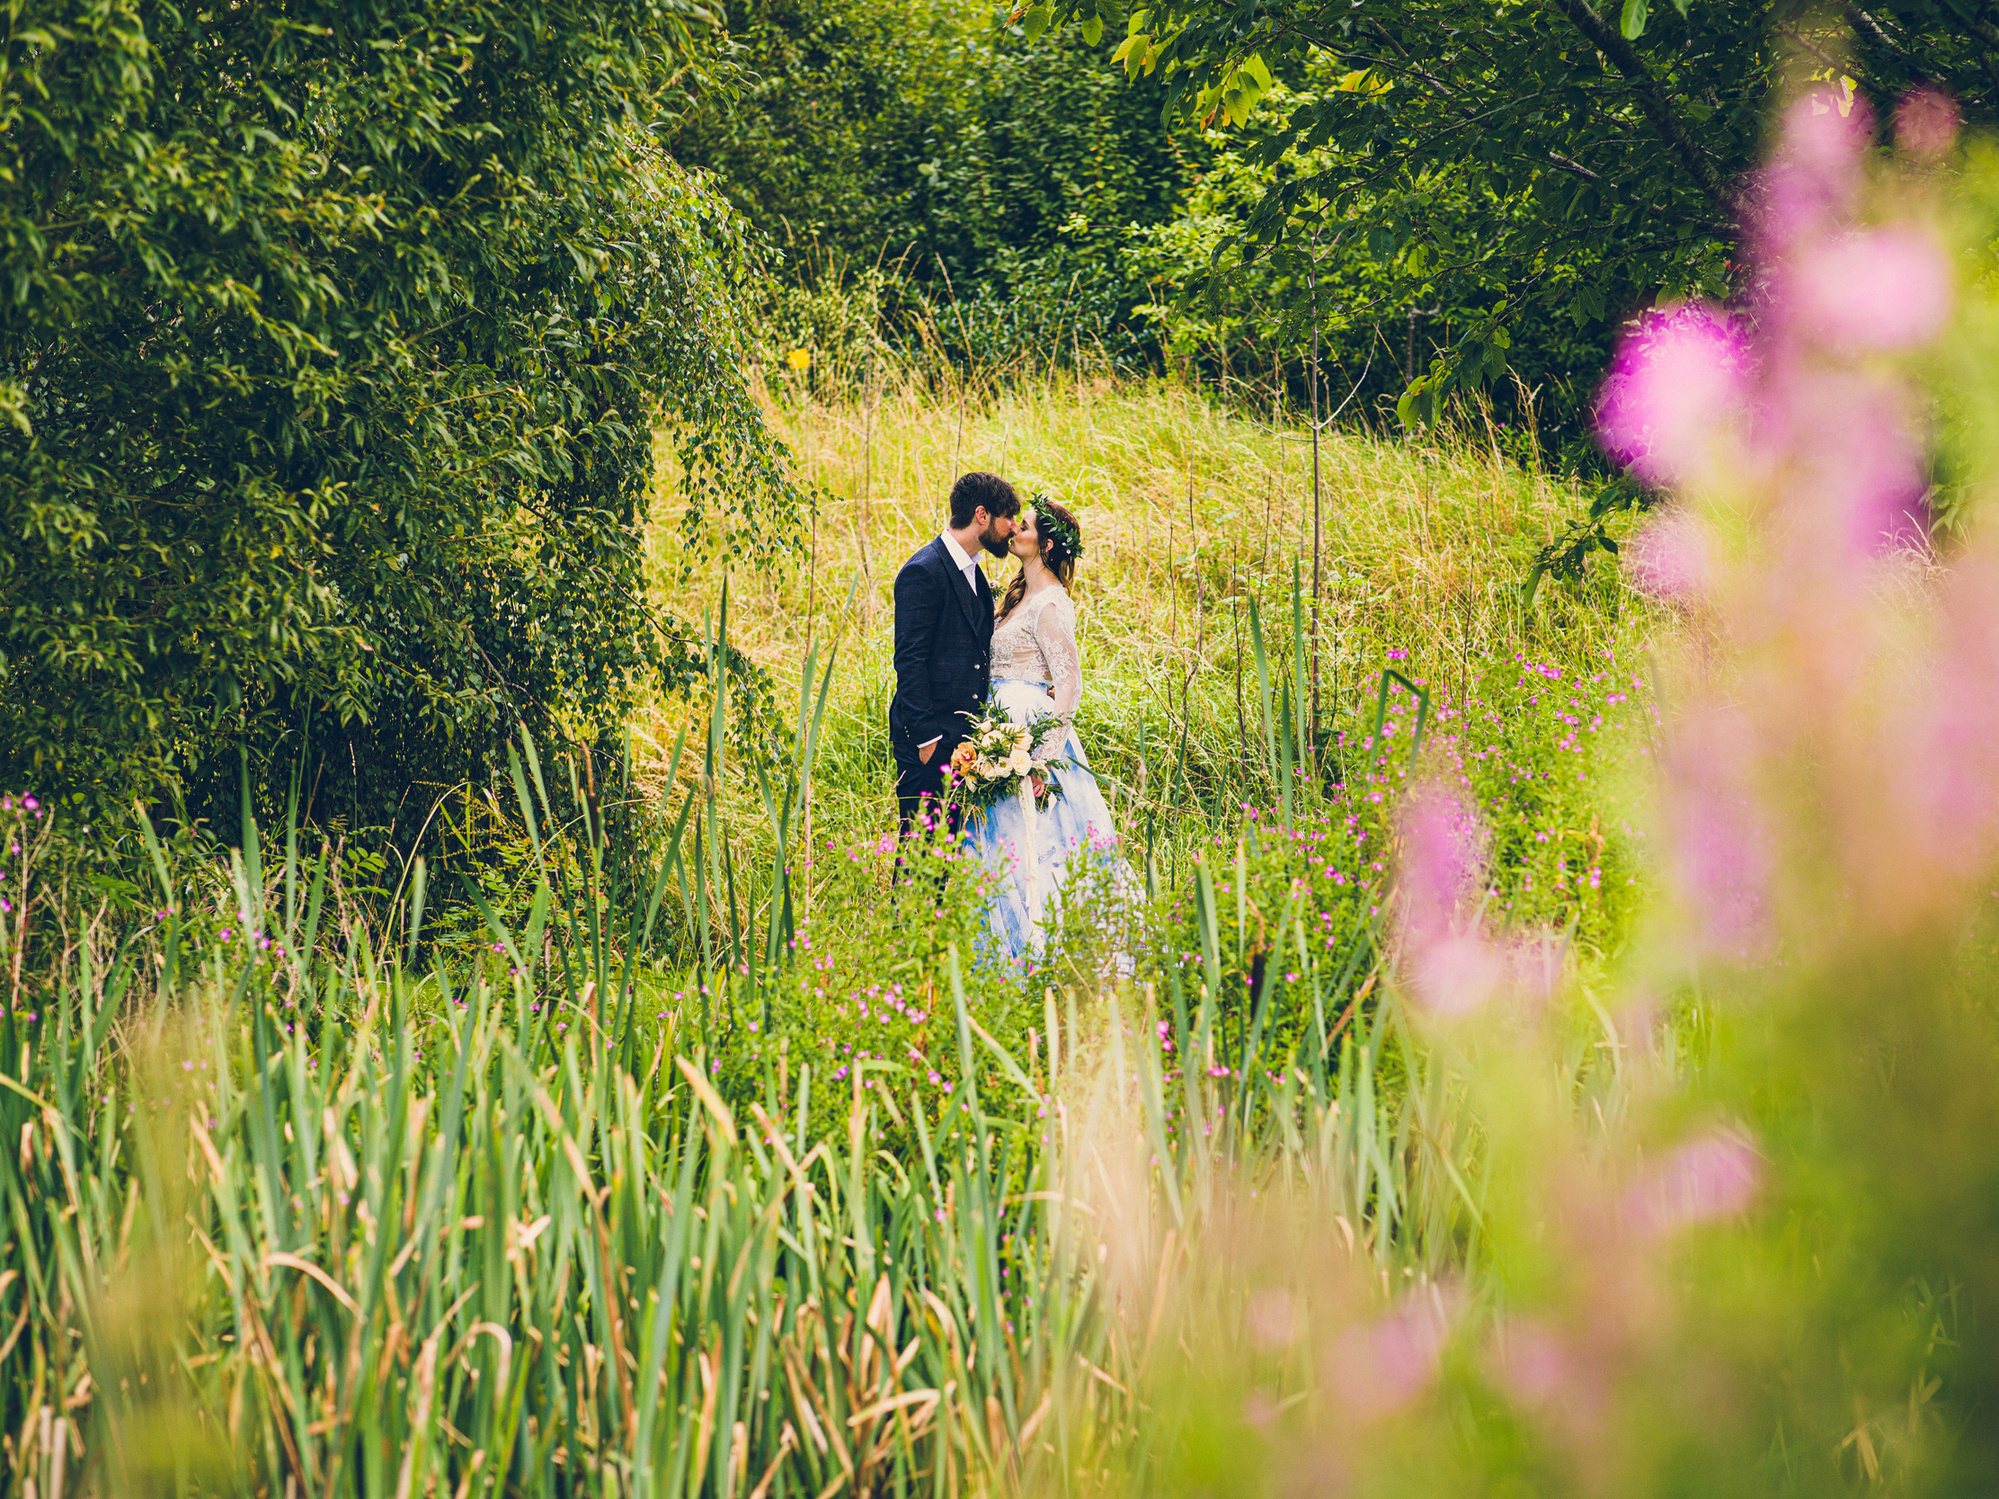 Sandry Studio Photographers contact page photo. Professional wedding commercial and portrait photographers near Worcester UK Photo of couple by pond at Oldcastle venue Malvern